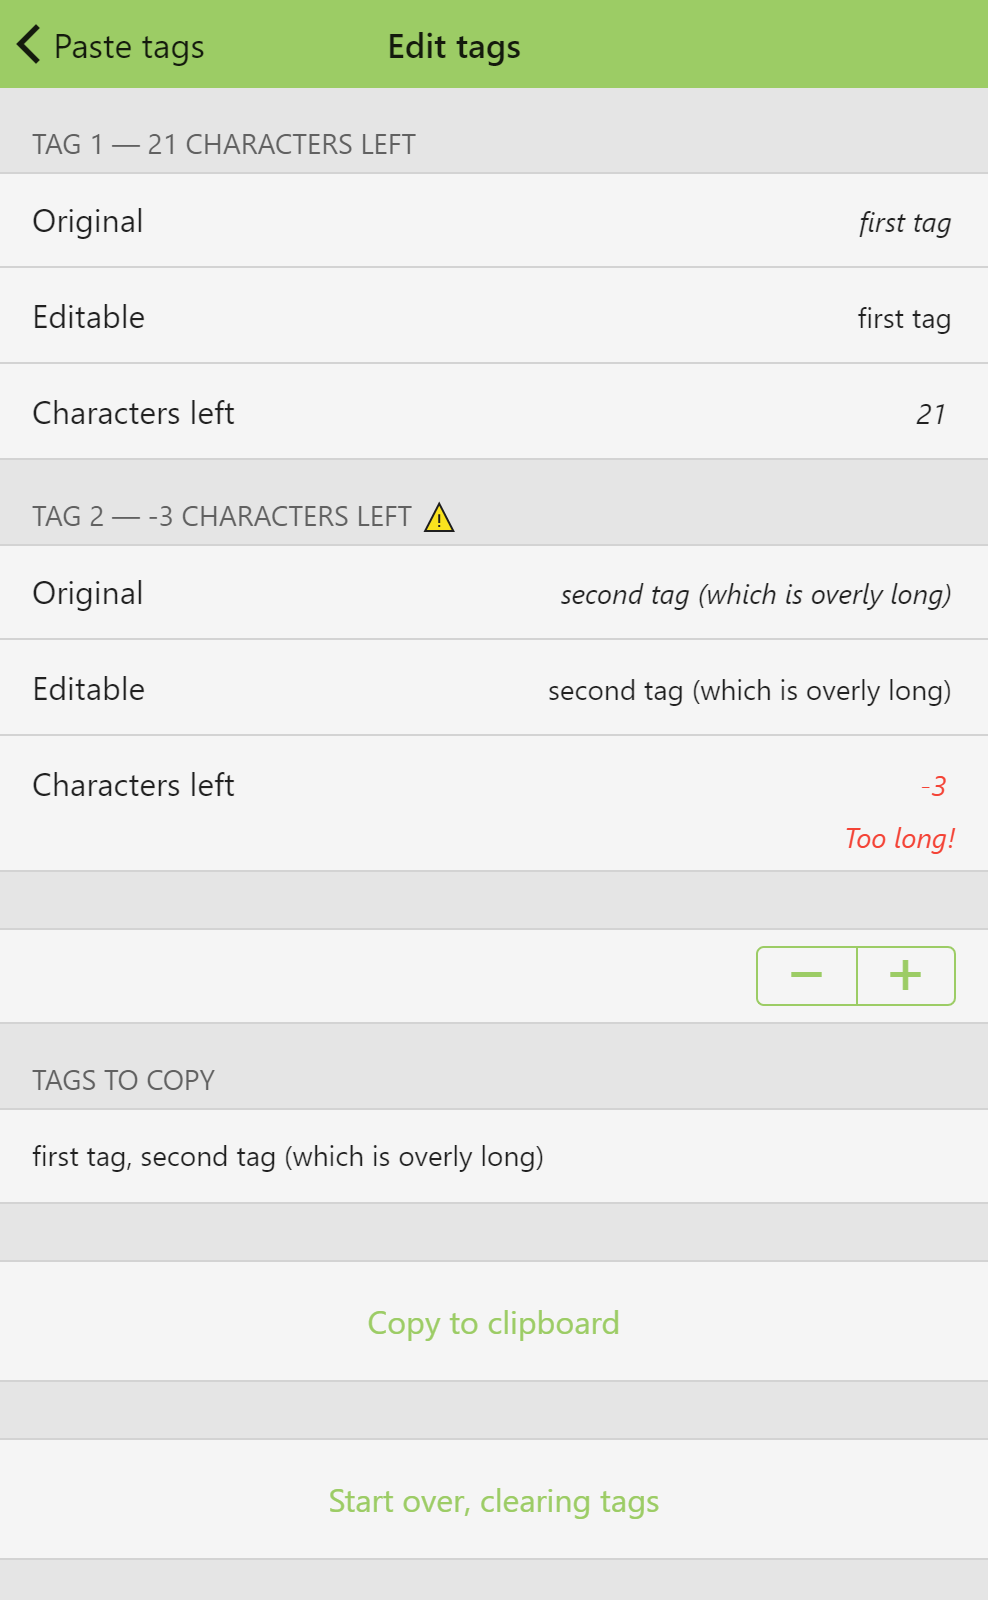 Editing existing tags in the Tag Editor